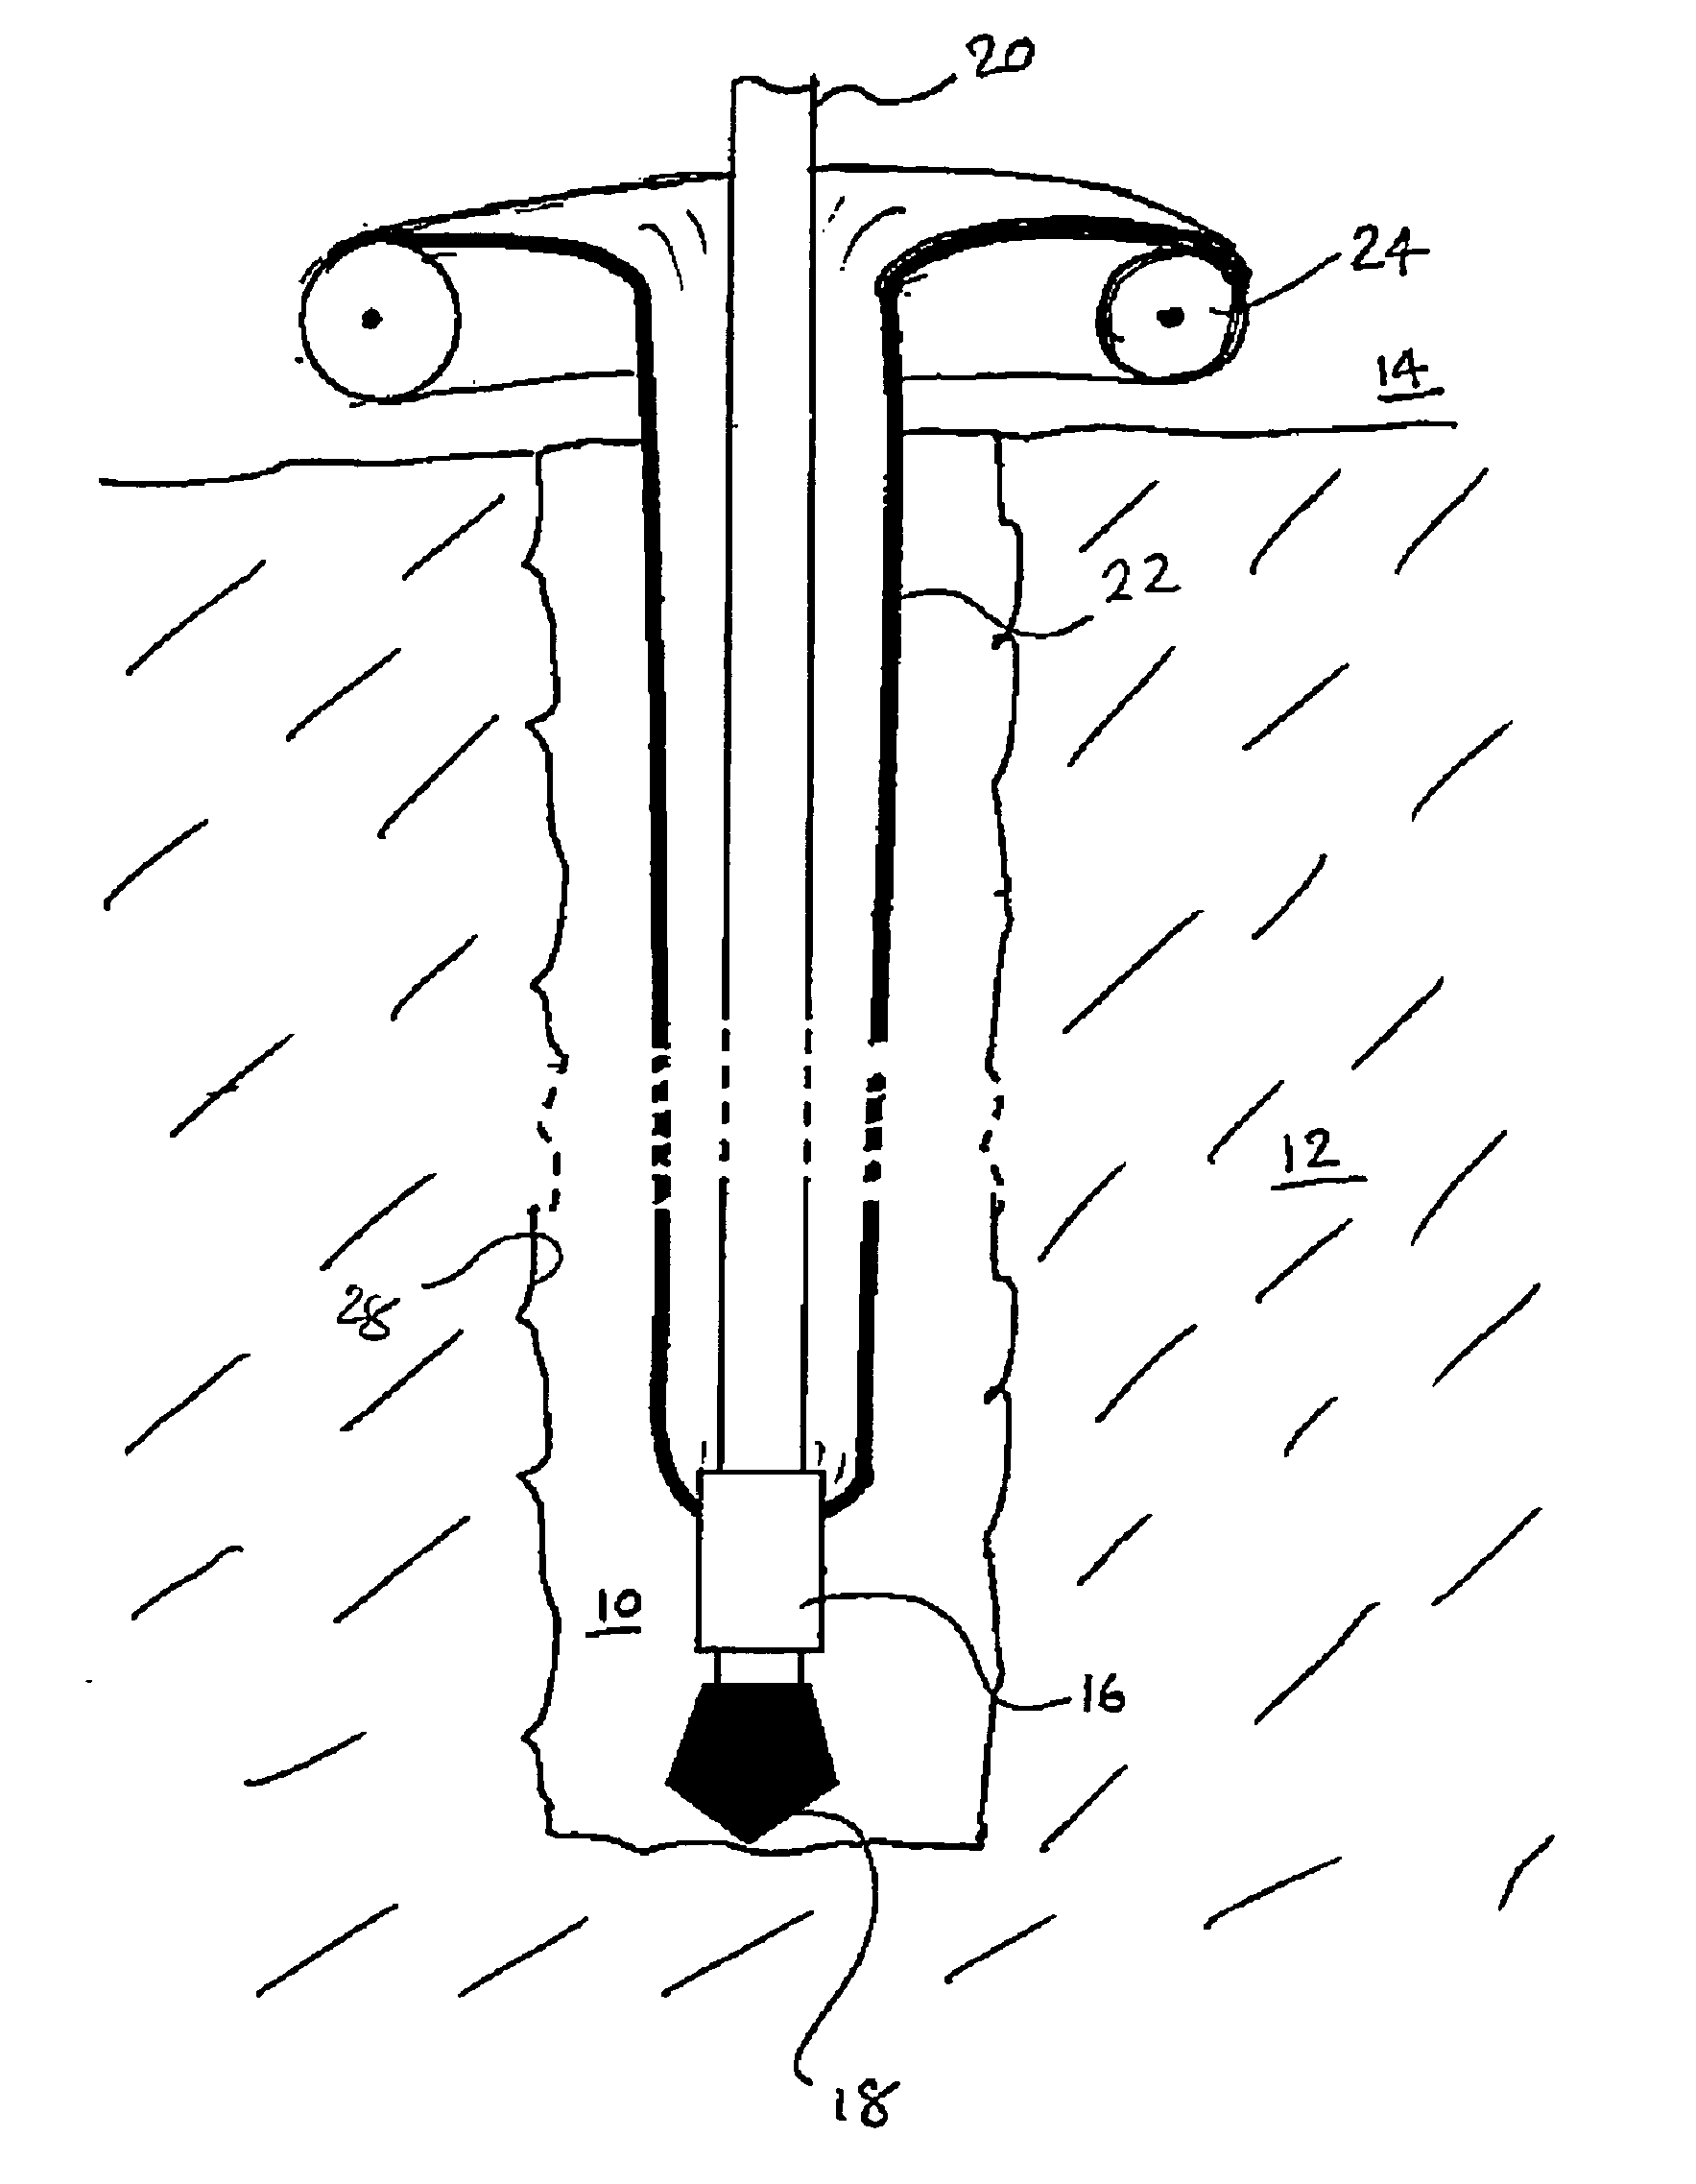 Methods and Apparatus for Well Construction